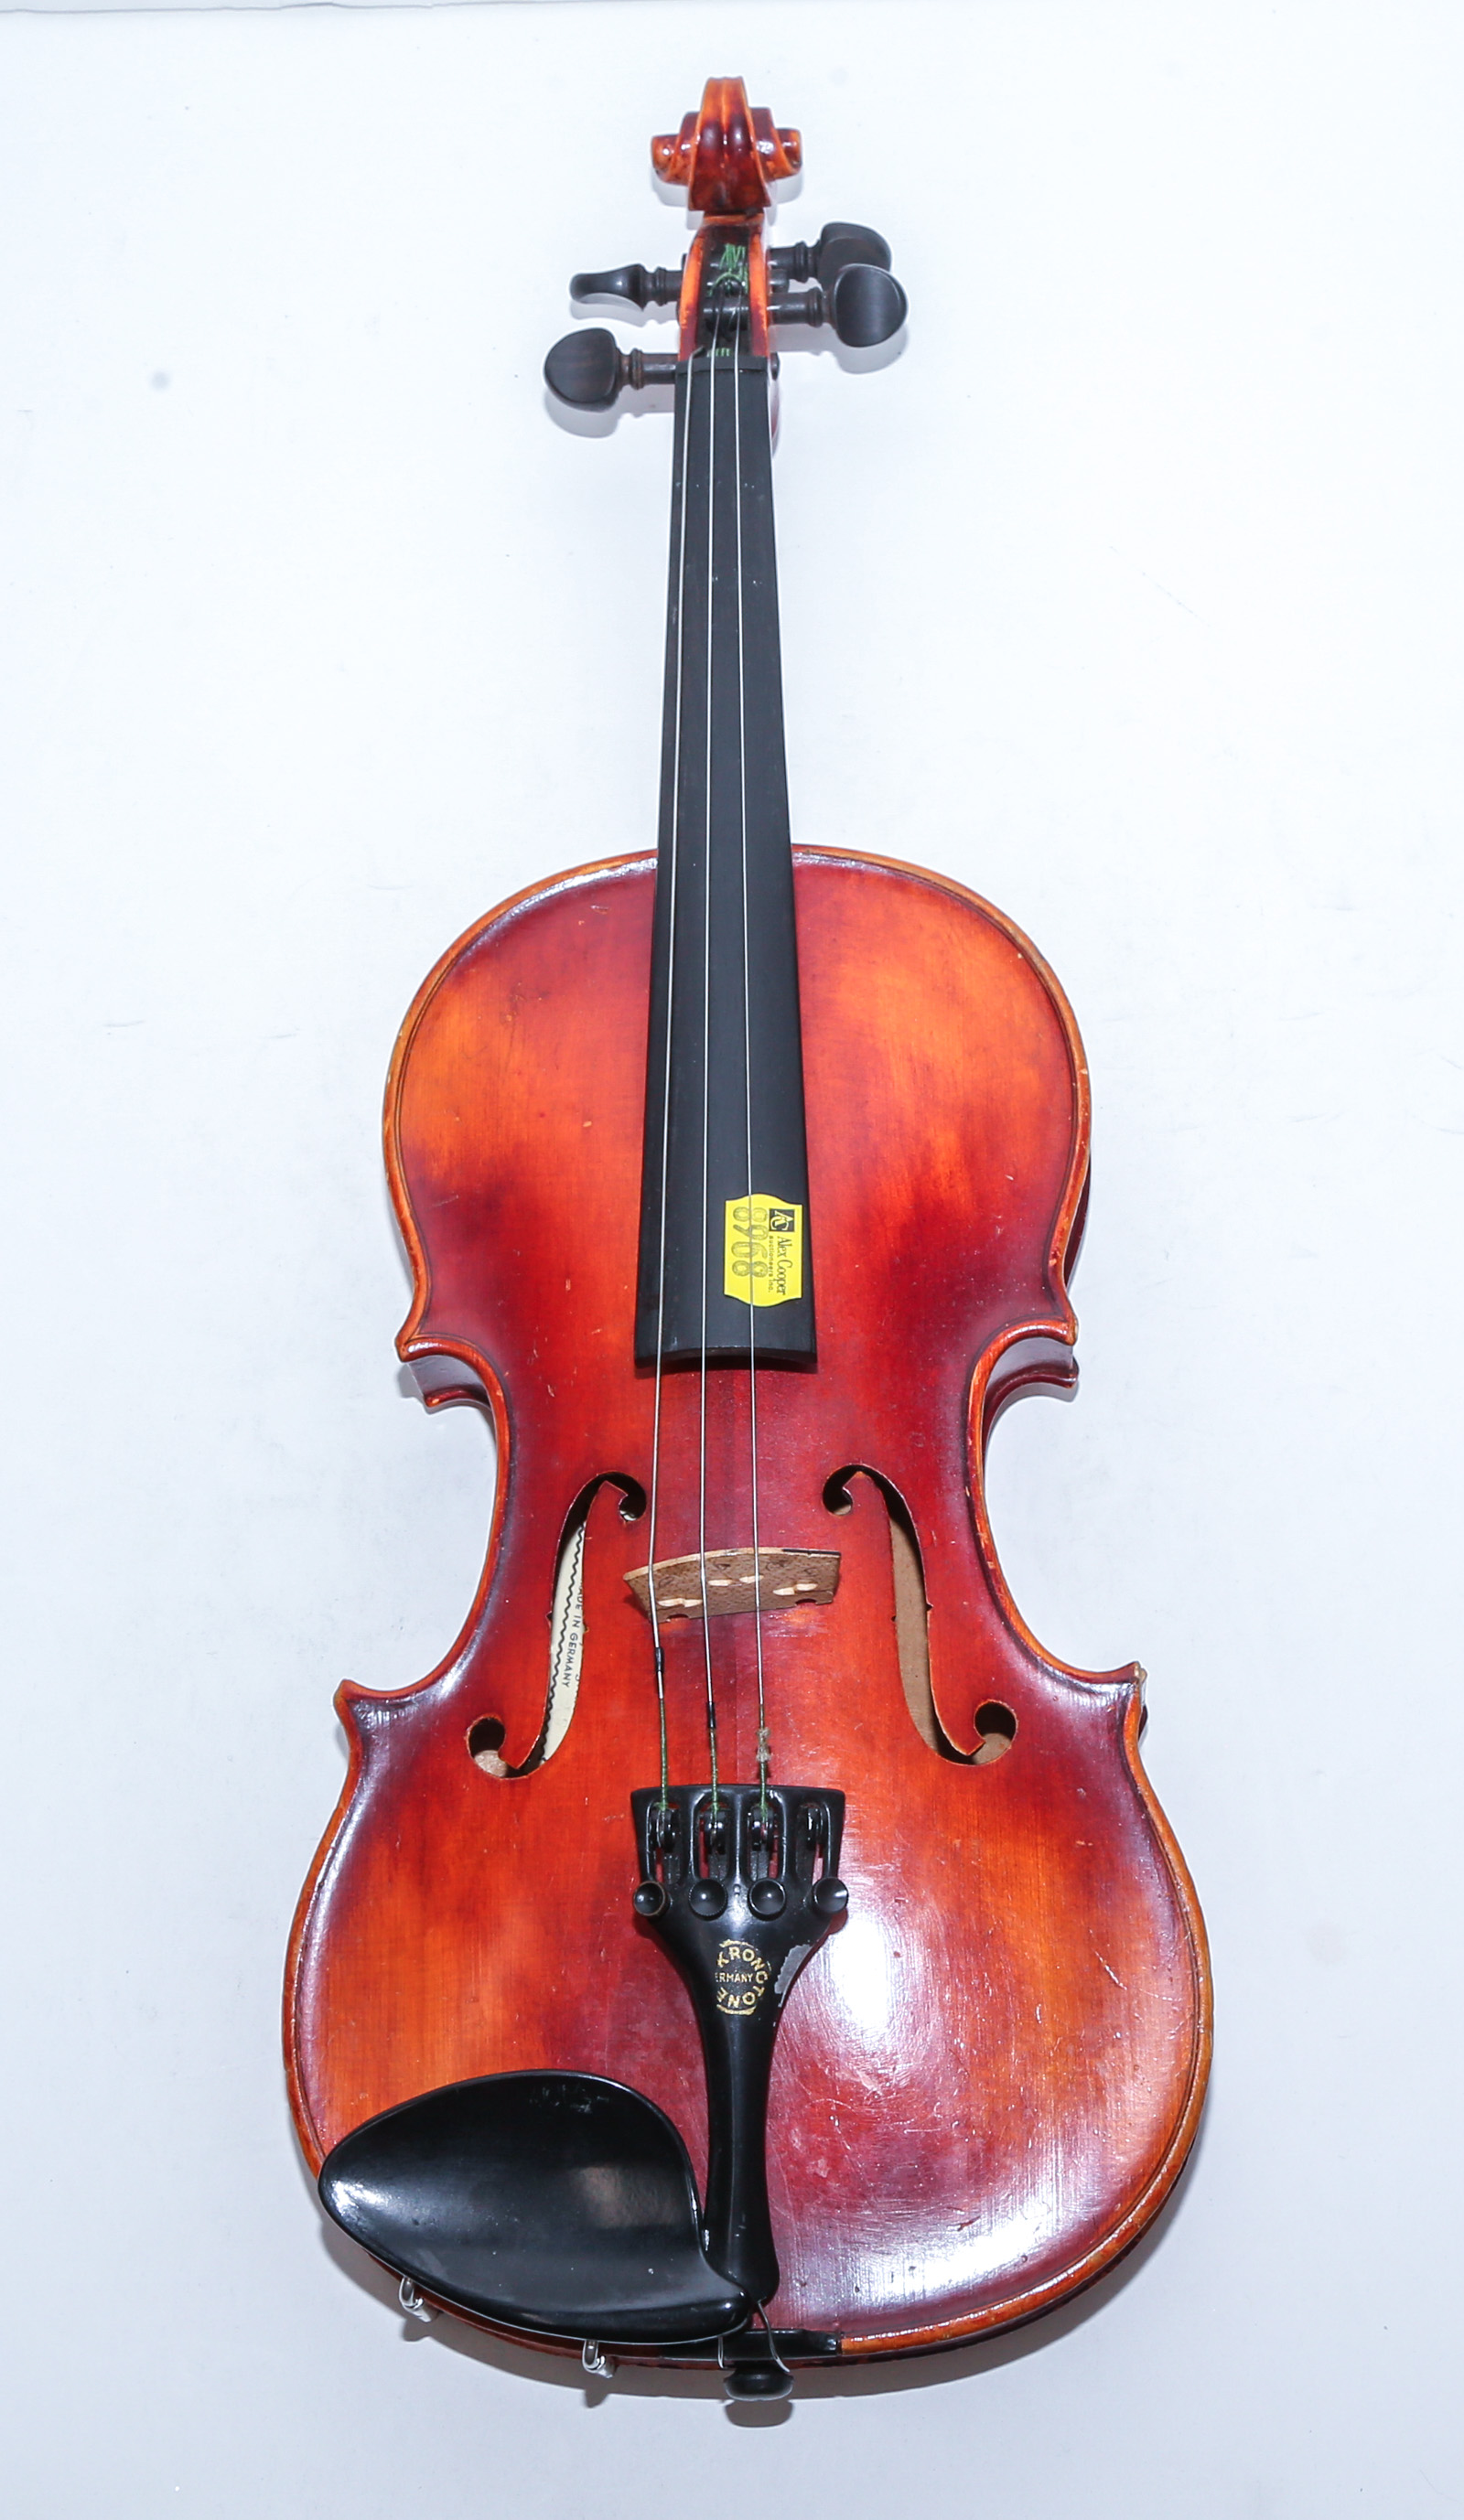 ANTON SCHROETTER VIOLIN WITH BOWS 3cb0a4